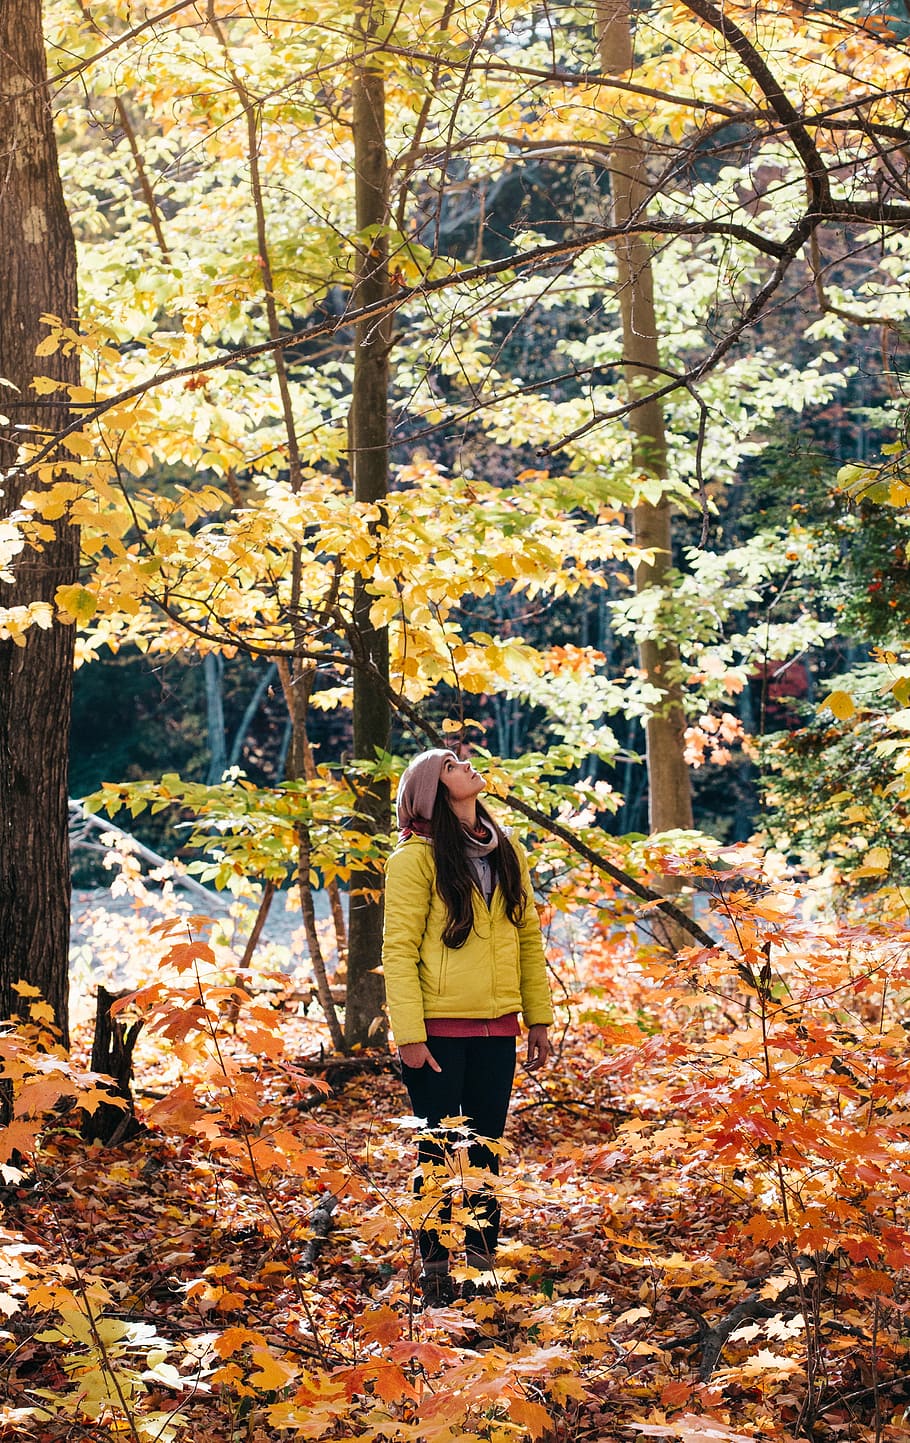 woman, standing, looking, surrounded, trees, yellow, jacket, daytime, plant, forest